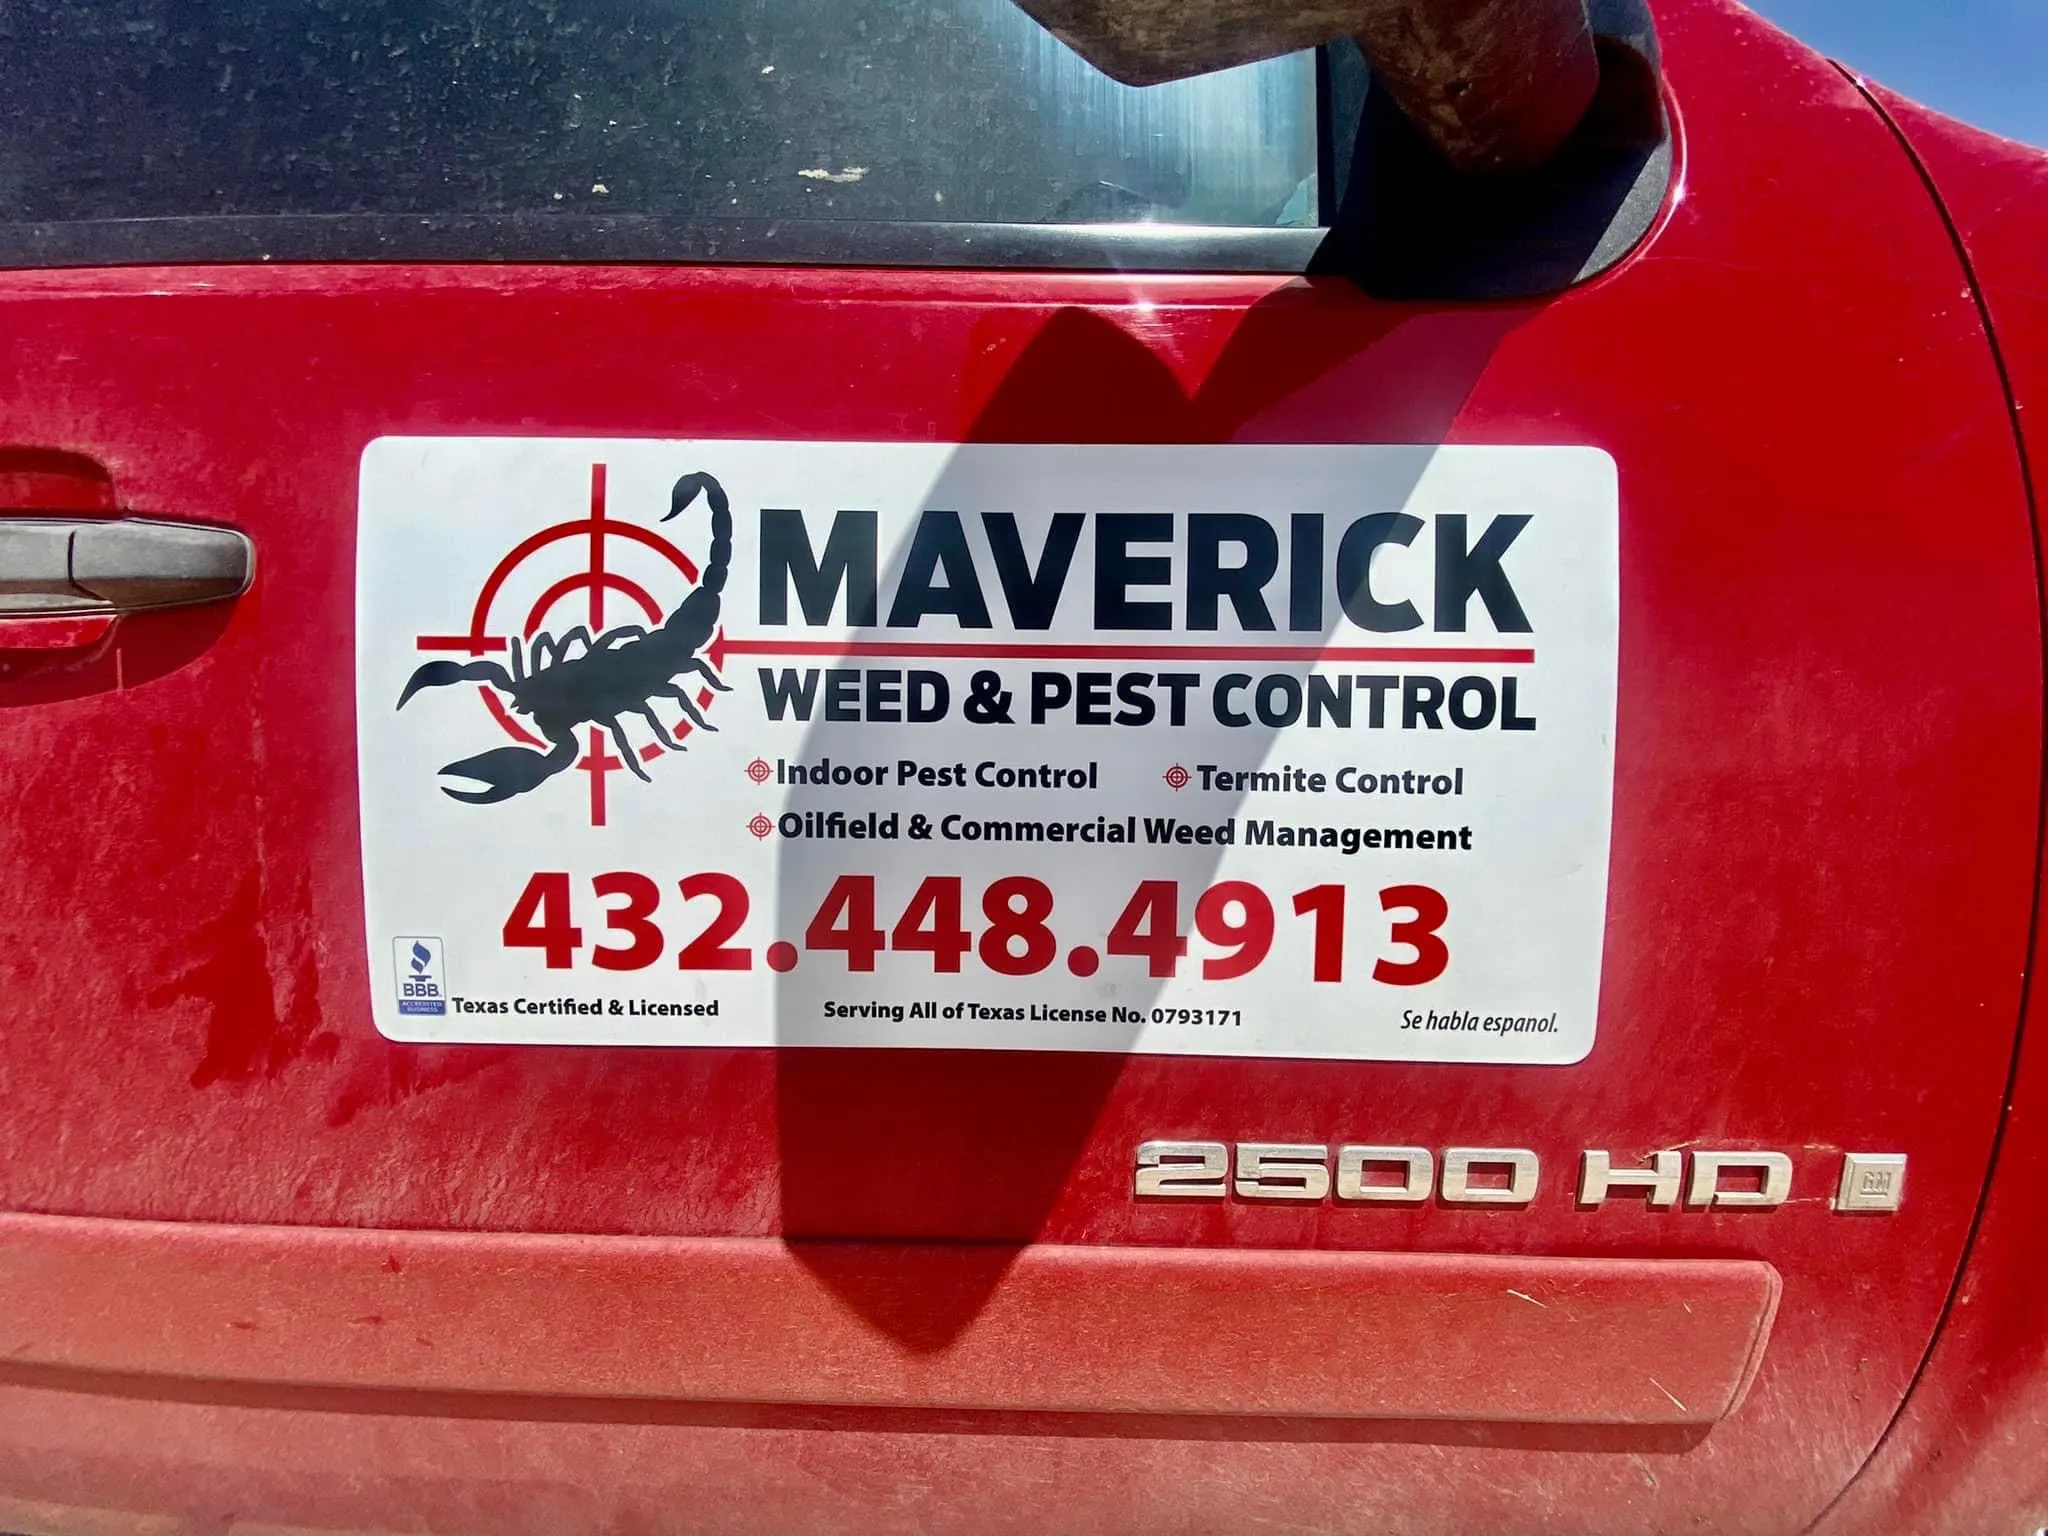 Pest Control for Maverick Weed & Pest Control in All of Texas, TX